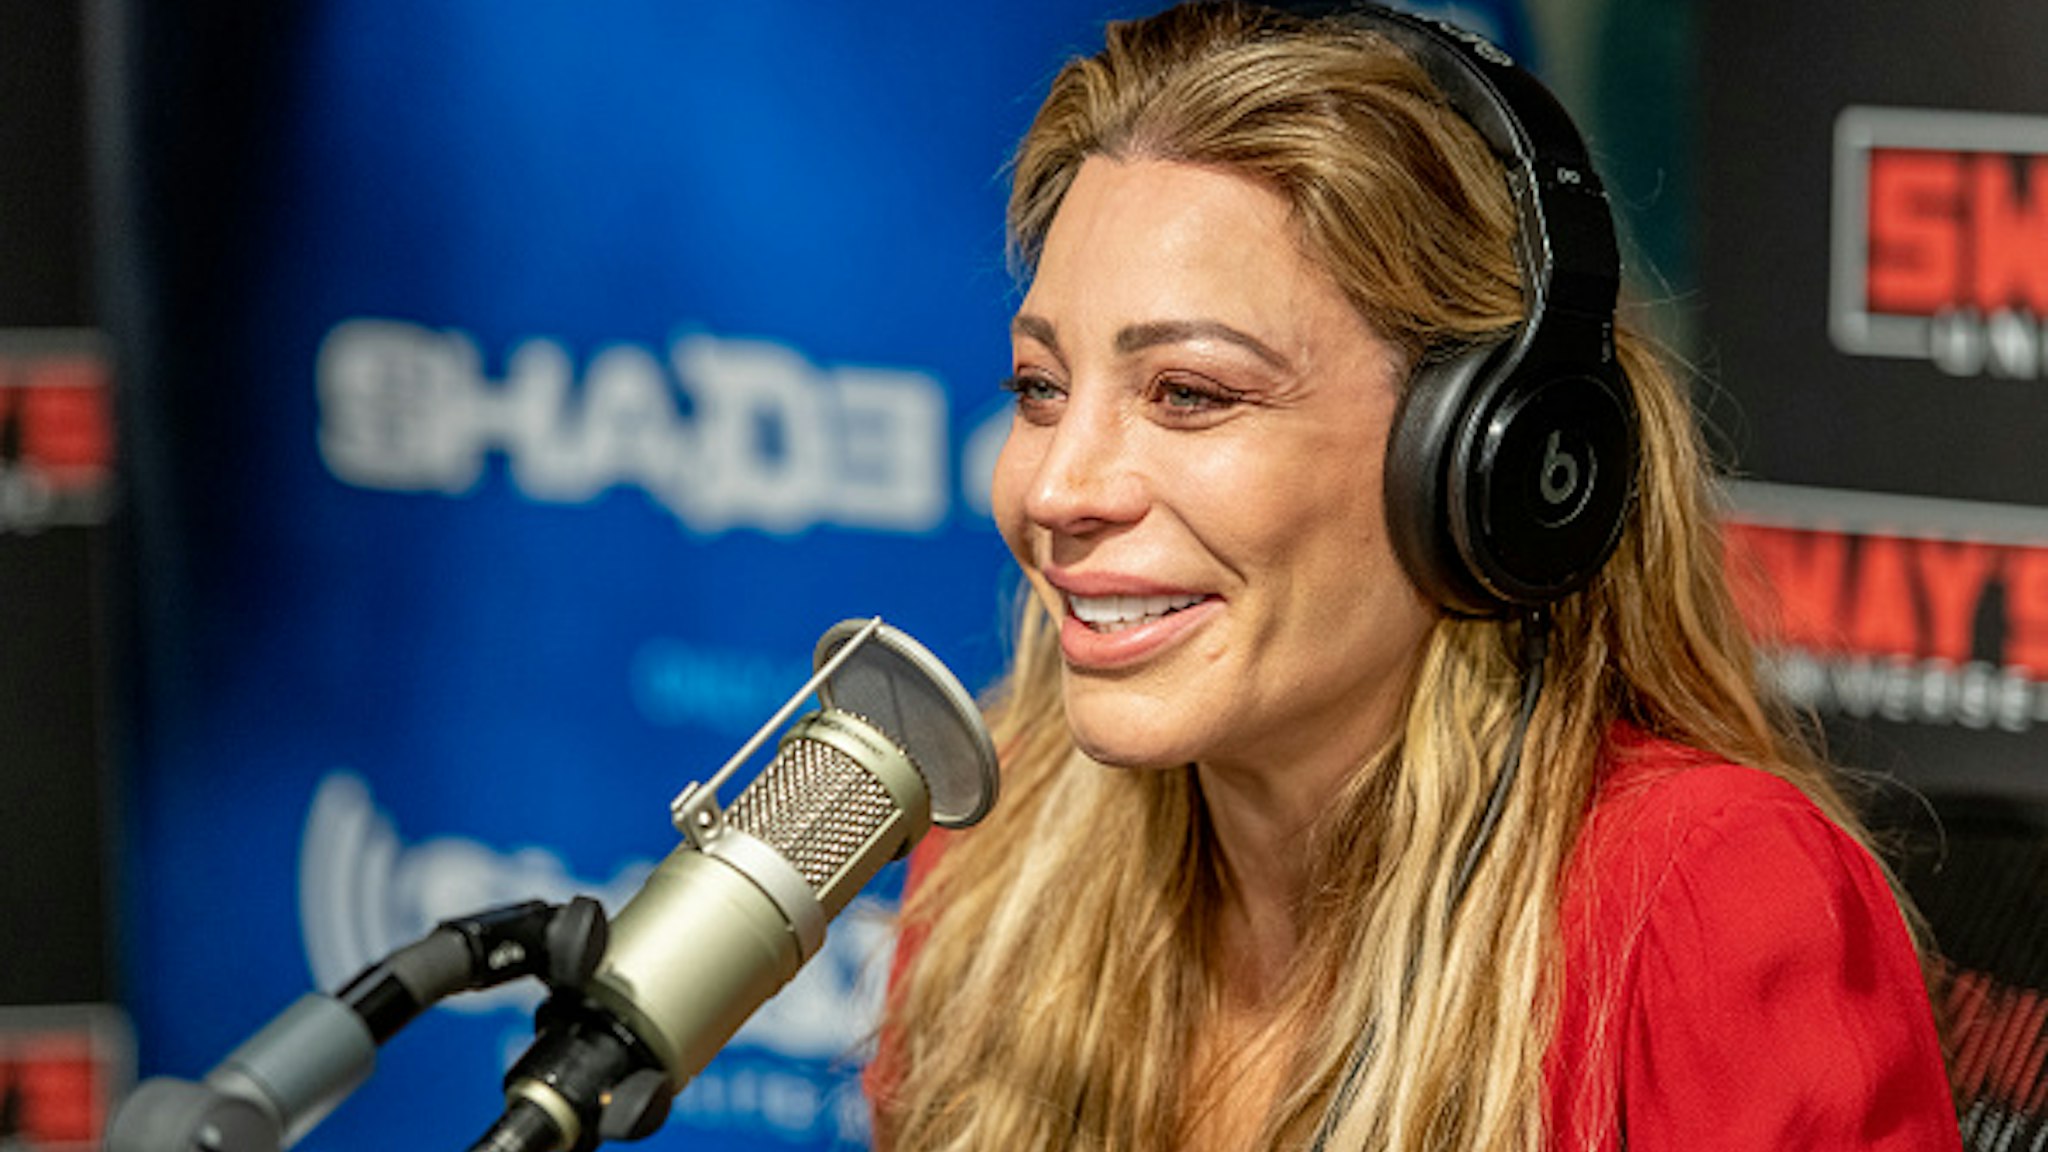 NEW YORK, NEW YORK - FEBRUARY 15: Singer Taylor Dayne visits "Sway in The Morning" on "Shade45" with host Sway Calloway at SiriusXM Studios on February 15, 2019 in New York City.